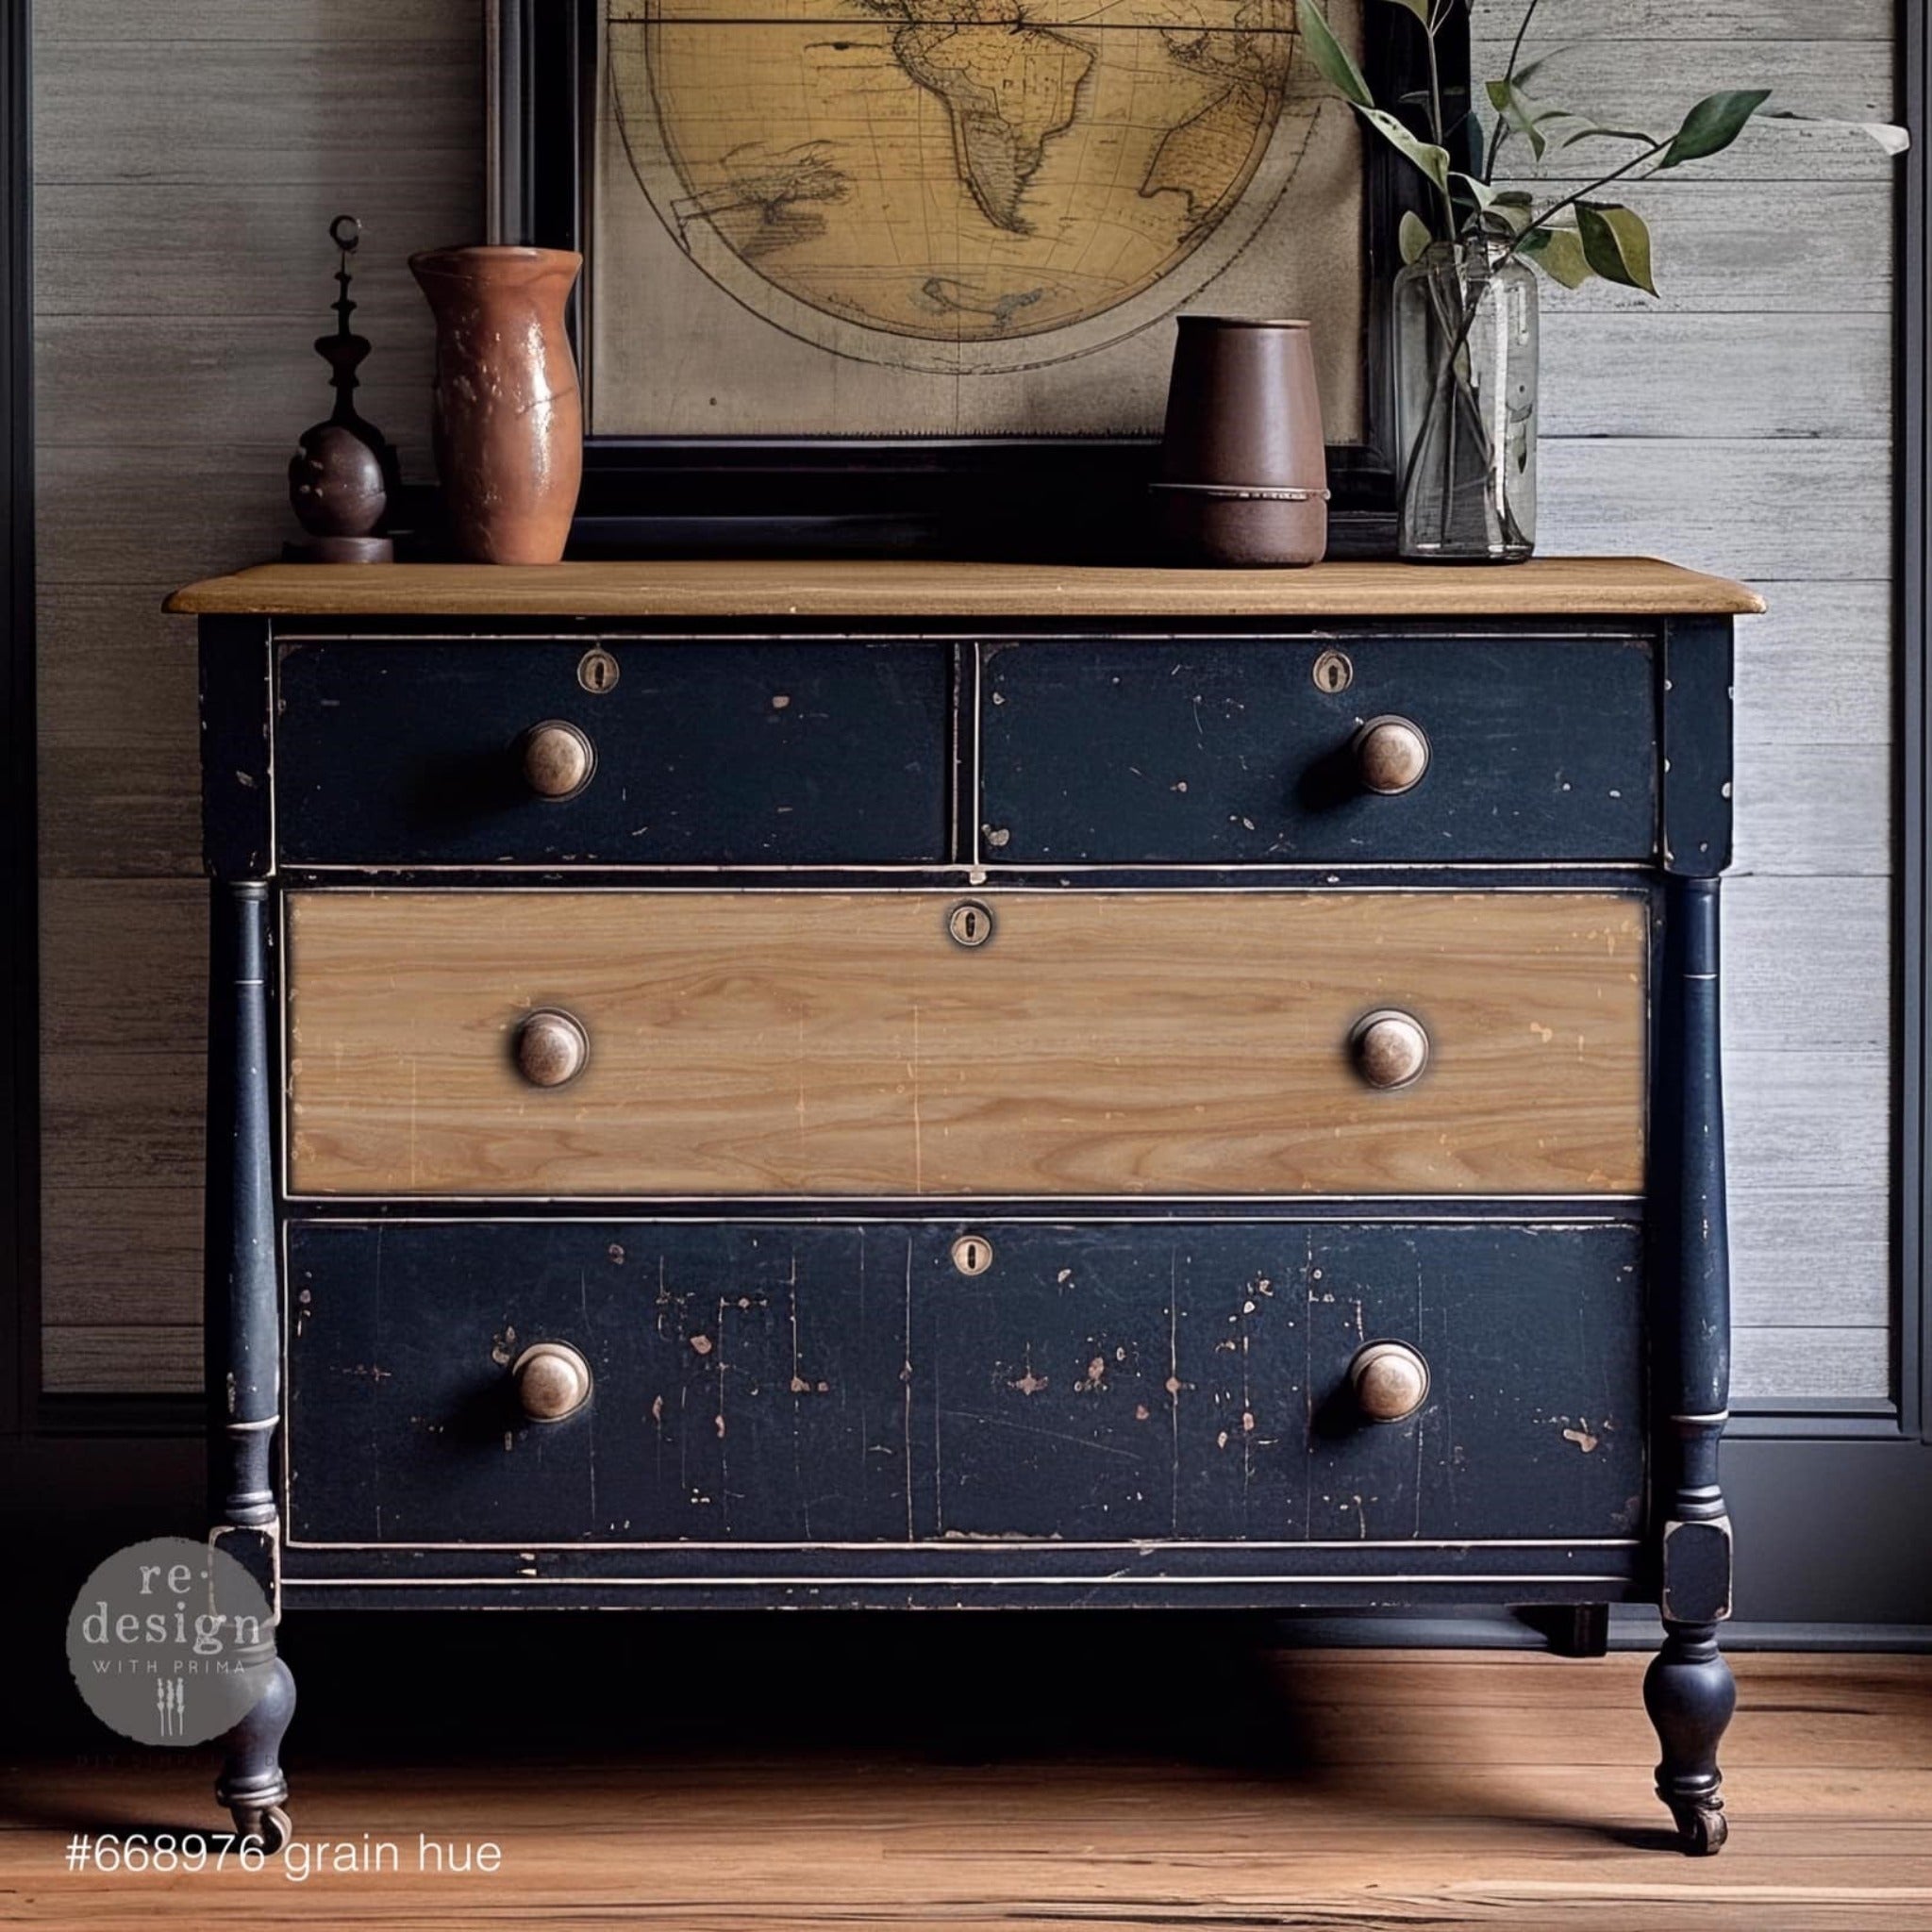 A vintage 4-drawer dresser is painted dark navy blue and features ReDesign with Prima's Grain Hue A1 fiber paper on the drawer in the middle.